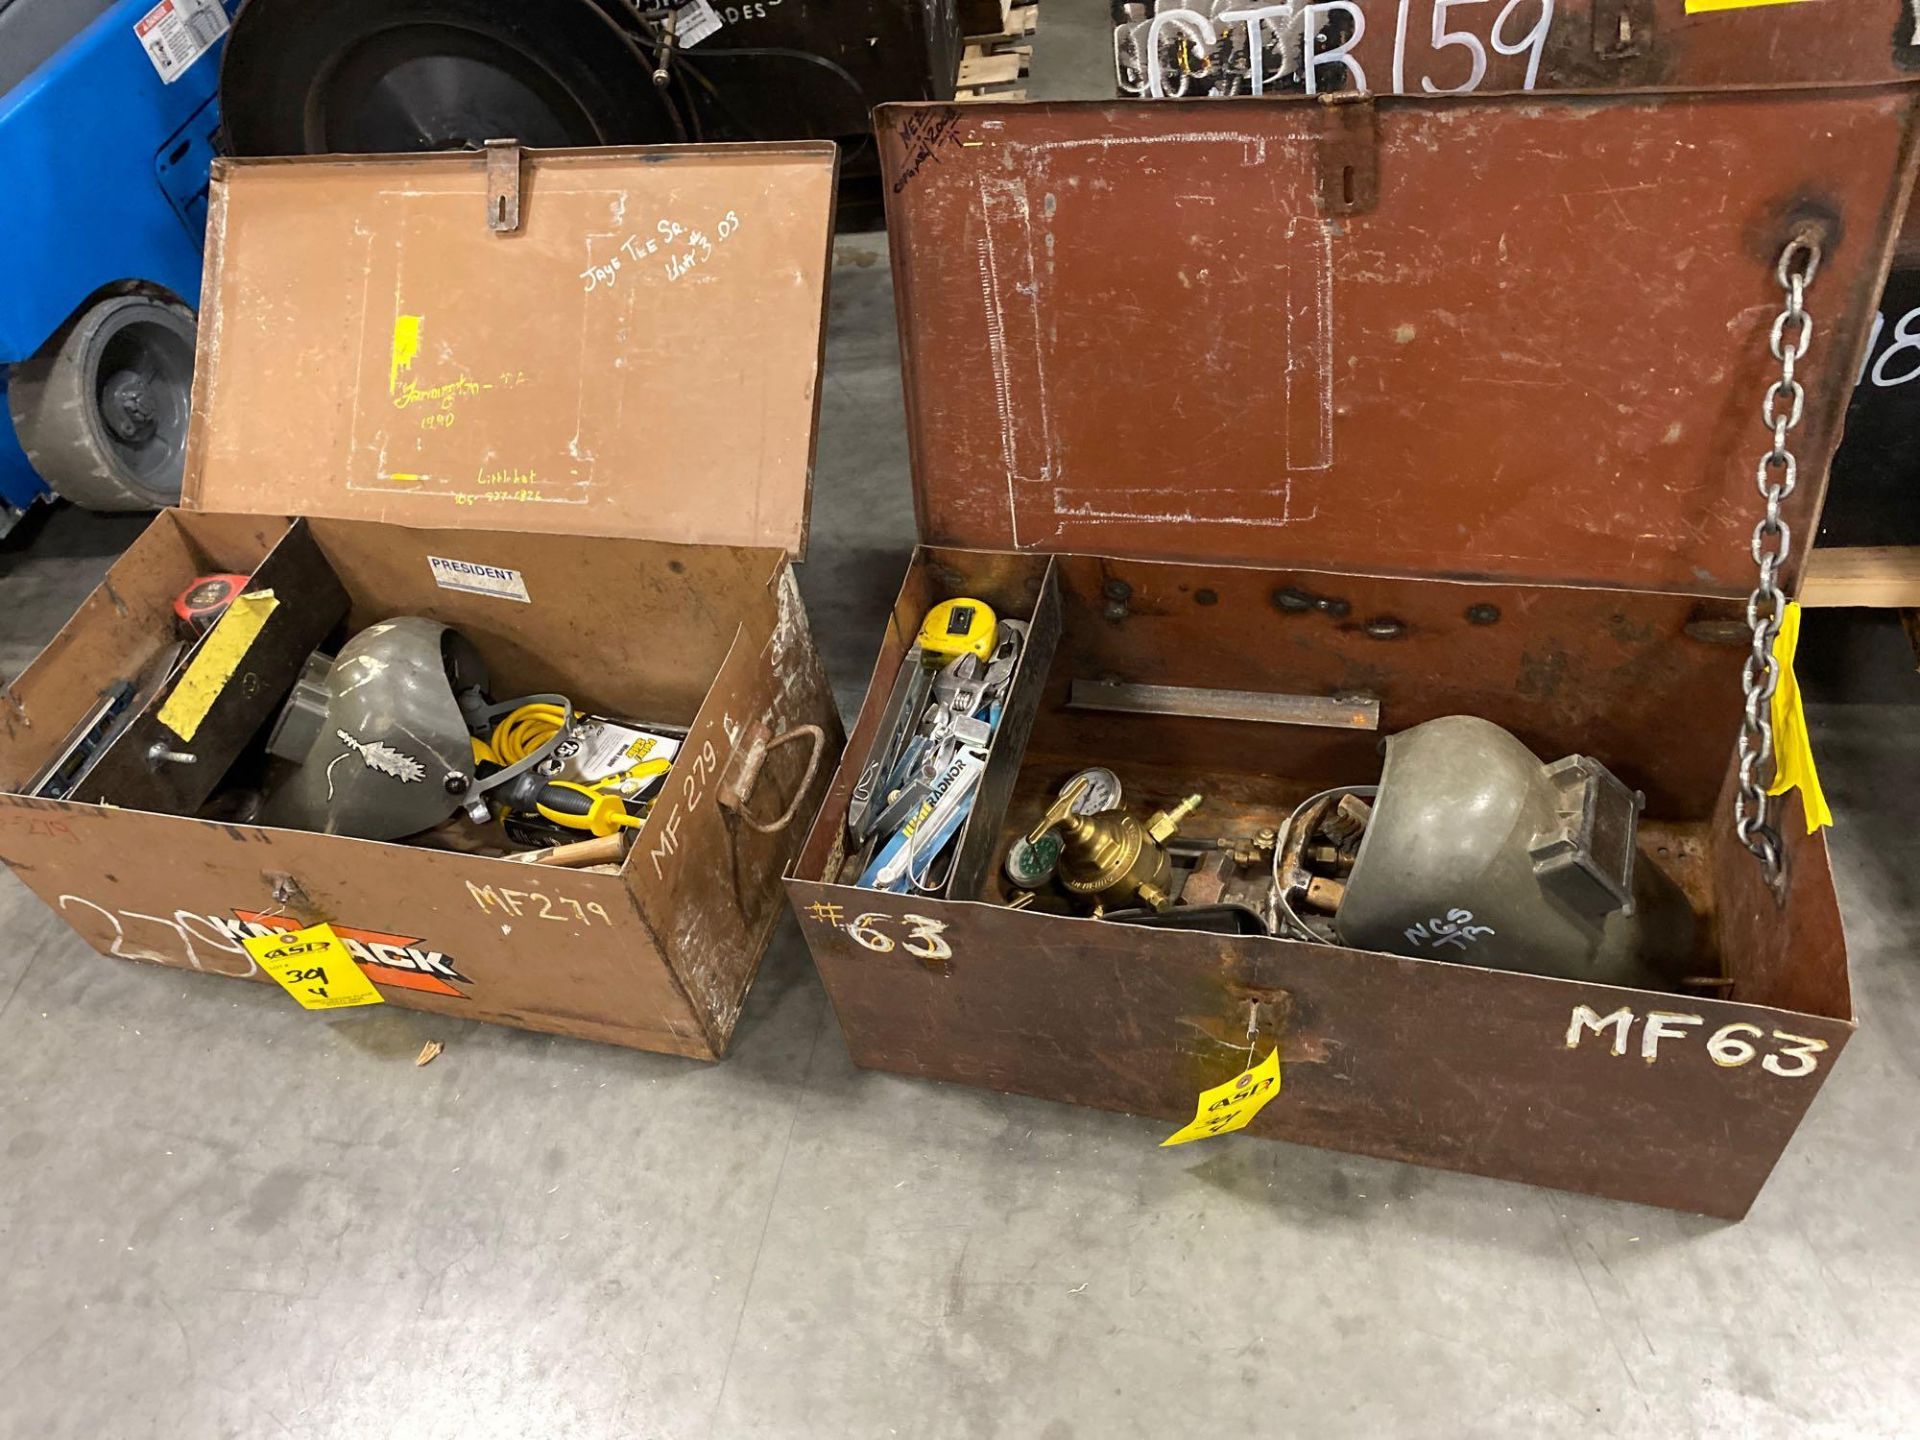 TWO KNACK BOXES WITH WELDING SUPPLIES